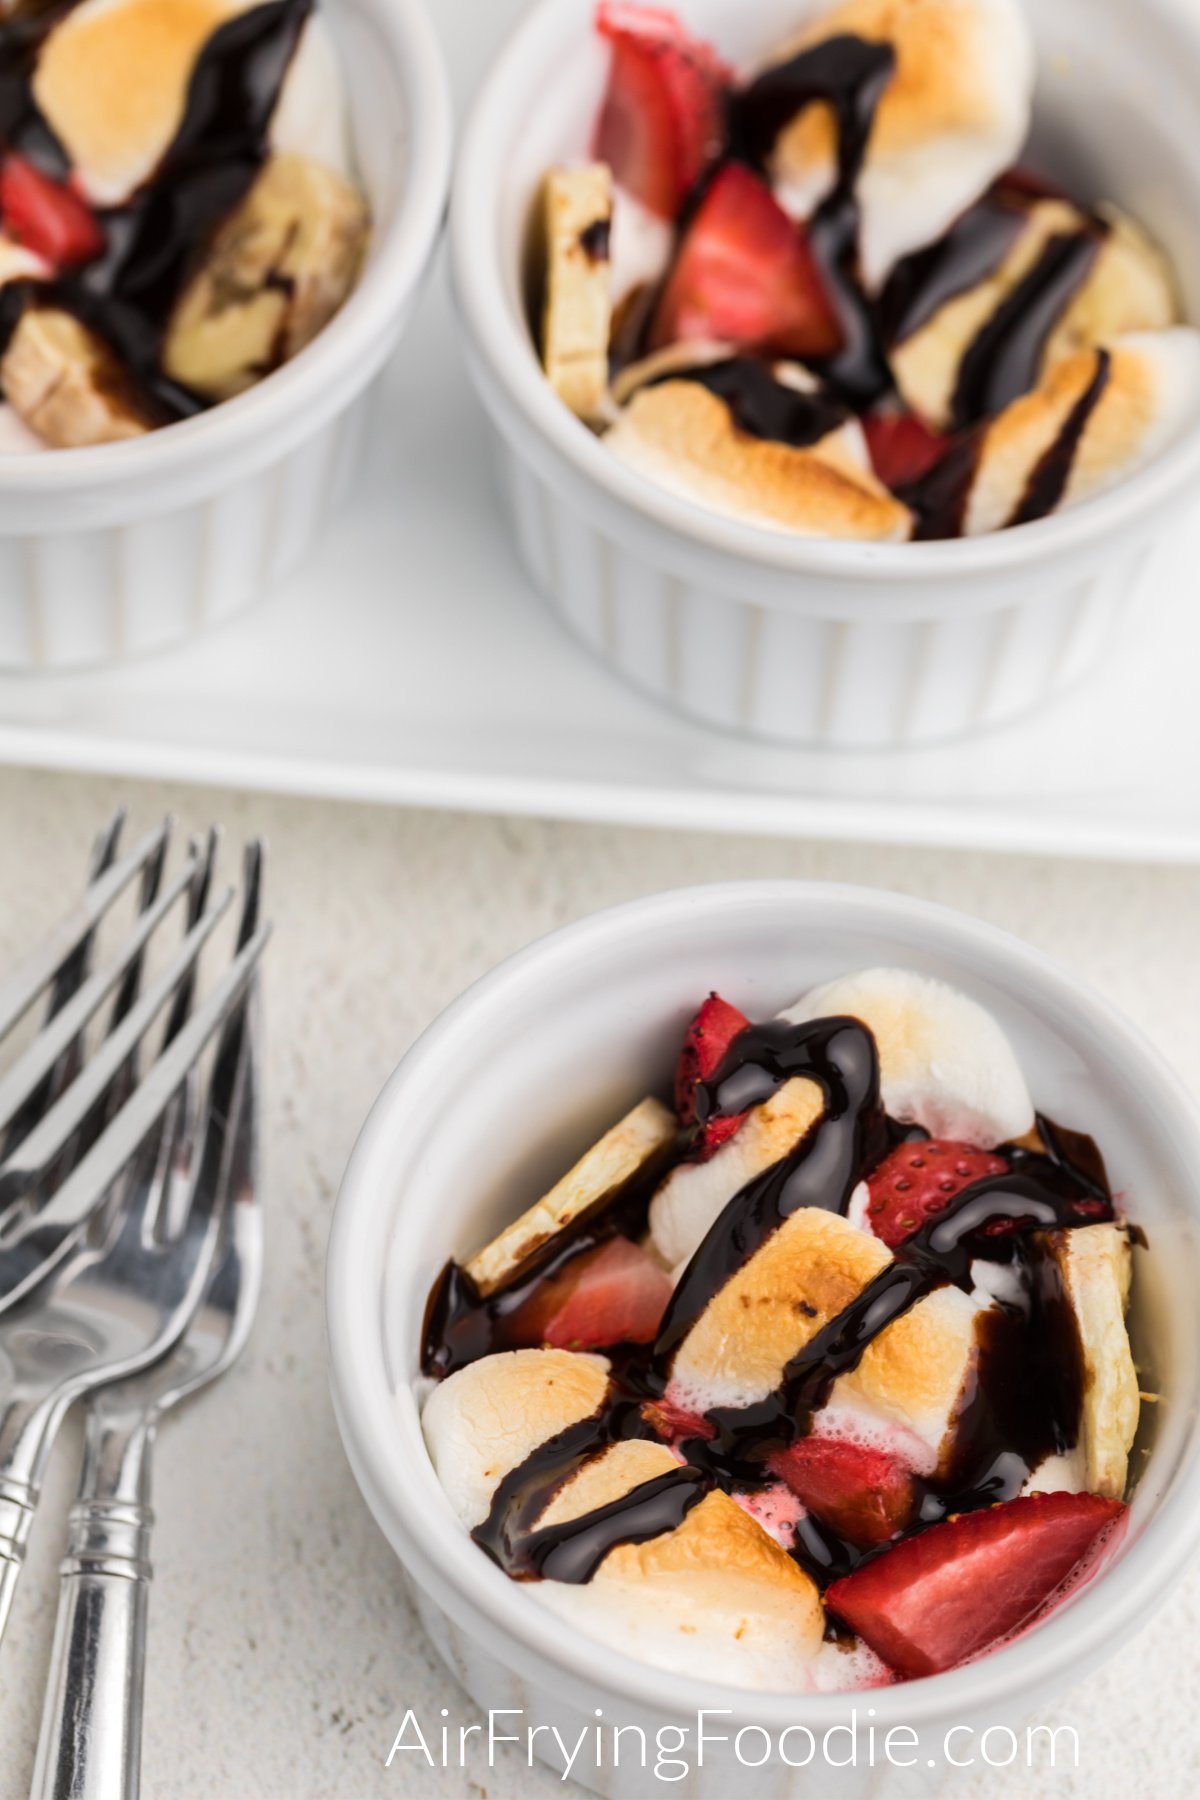 Strawberry Banana bowls made in the air fryer and drizlled with chocolate topping.